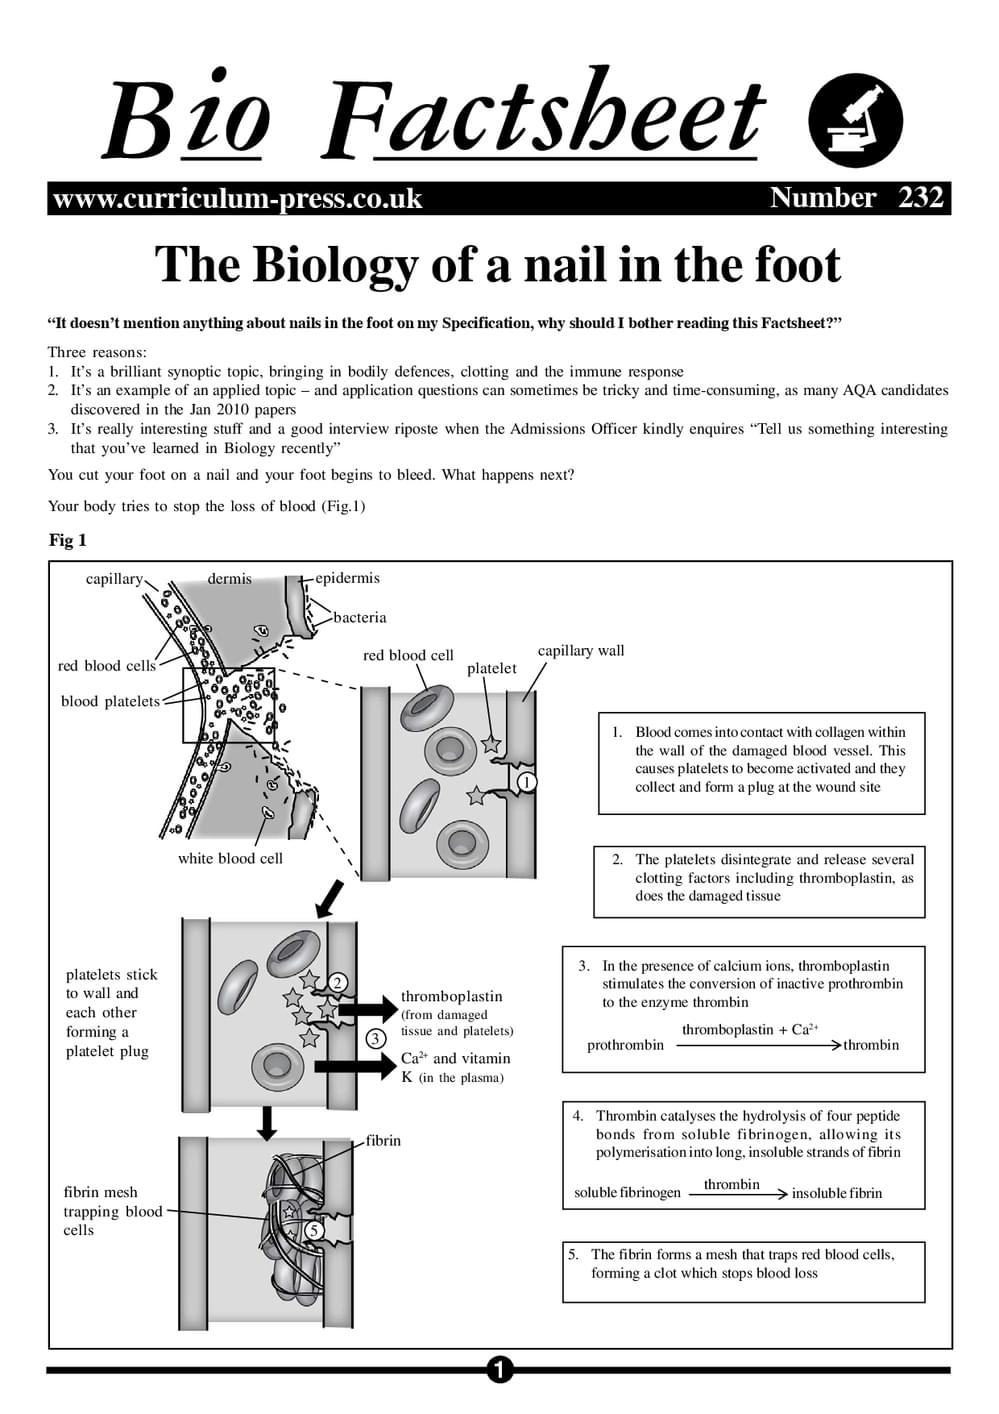 The Biology of a Nail in the Foot - Curriculum Press